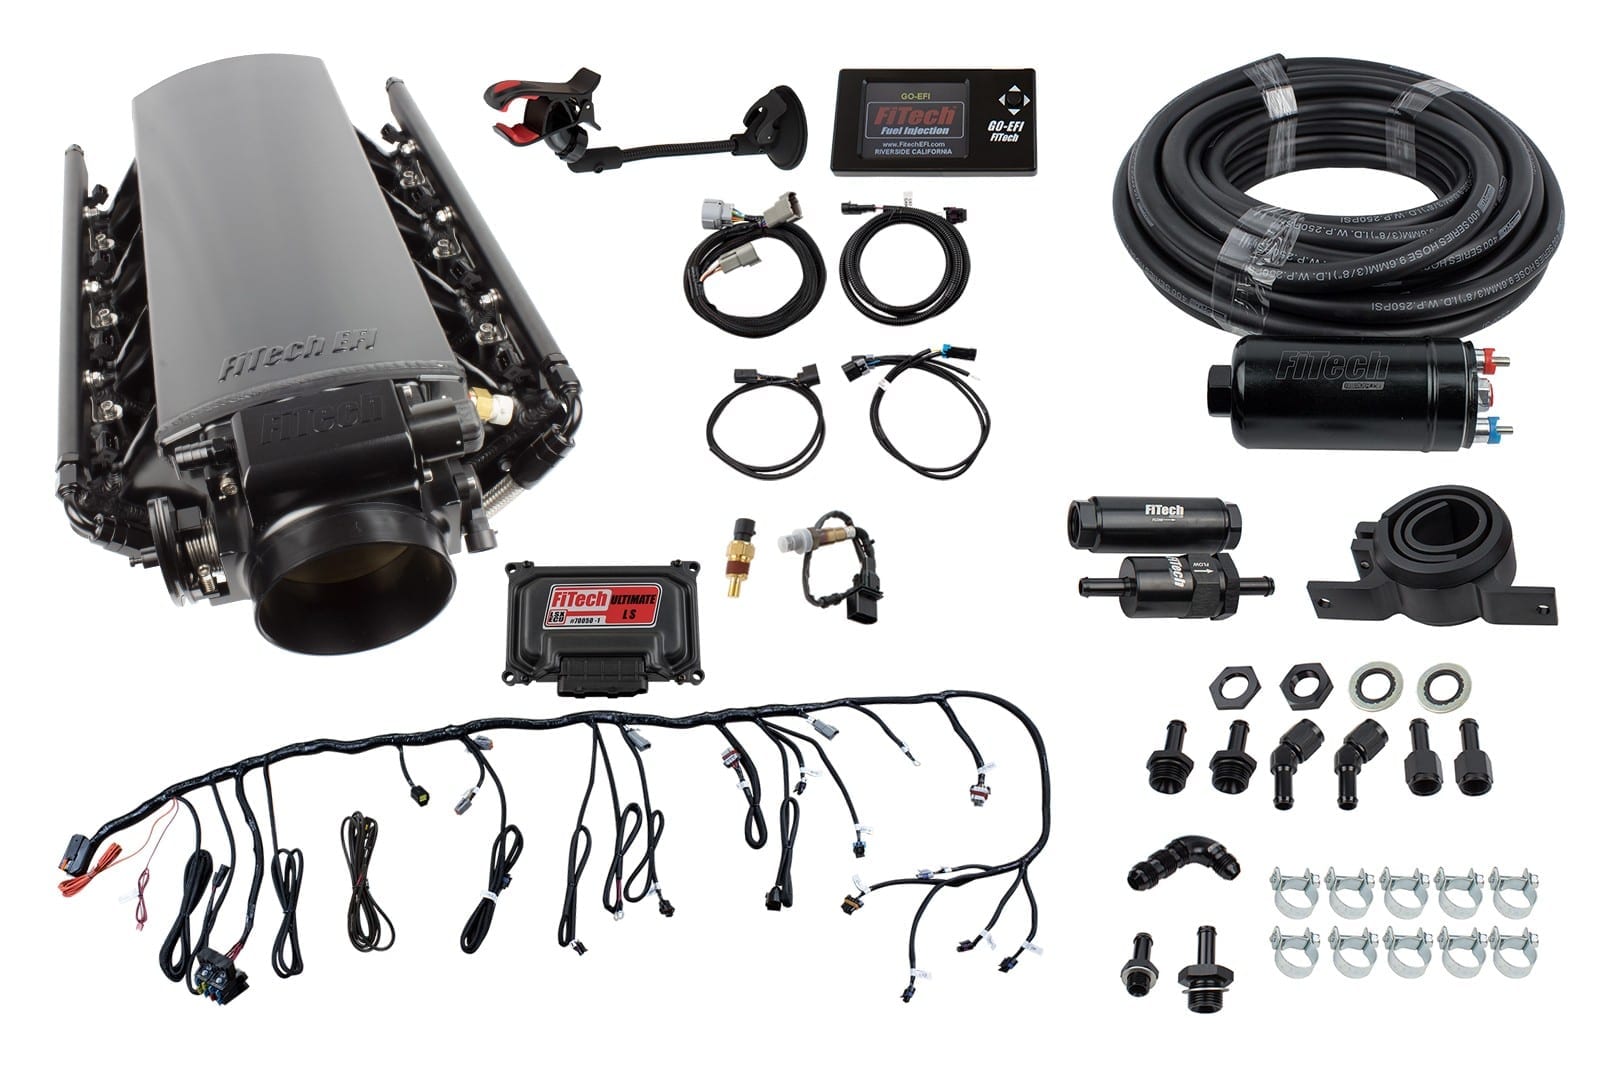 FiTech 71016 Ultimate LS Kit (500 HP, Transmission Control, Inline Fuel Pump)-for LS7